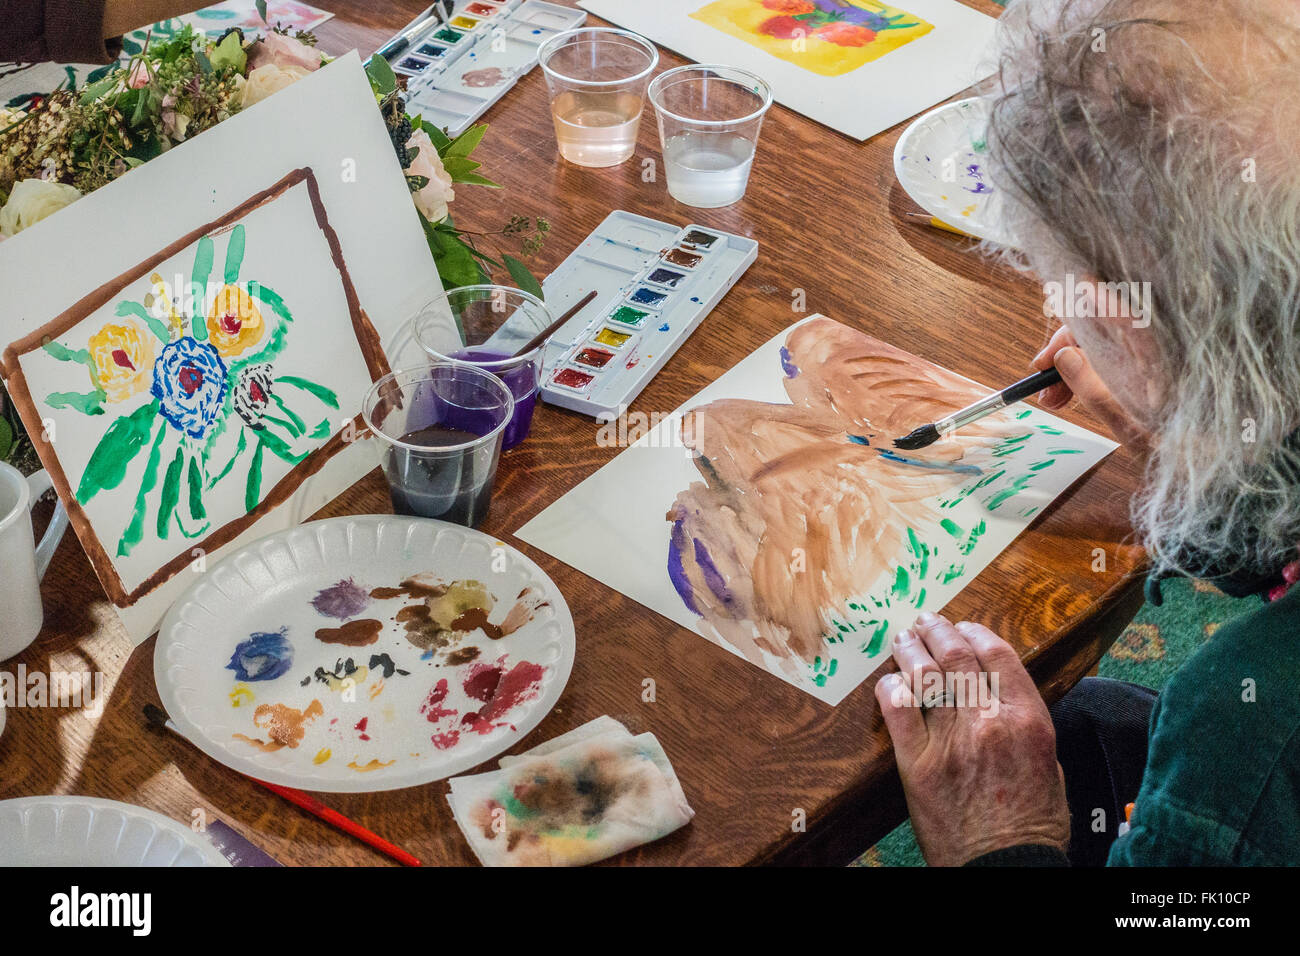 A Male Artist Paints In A Watercolor Class For Seniors At Garden